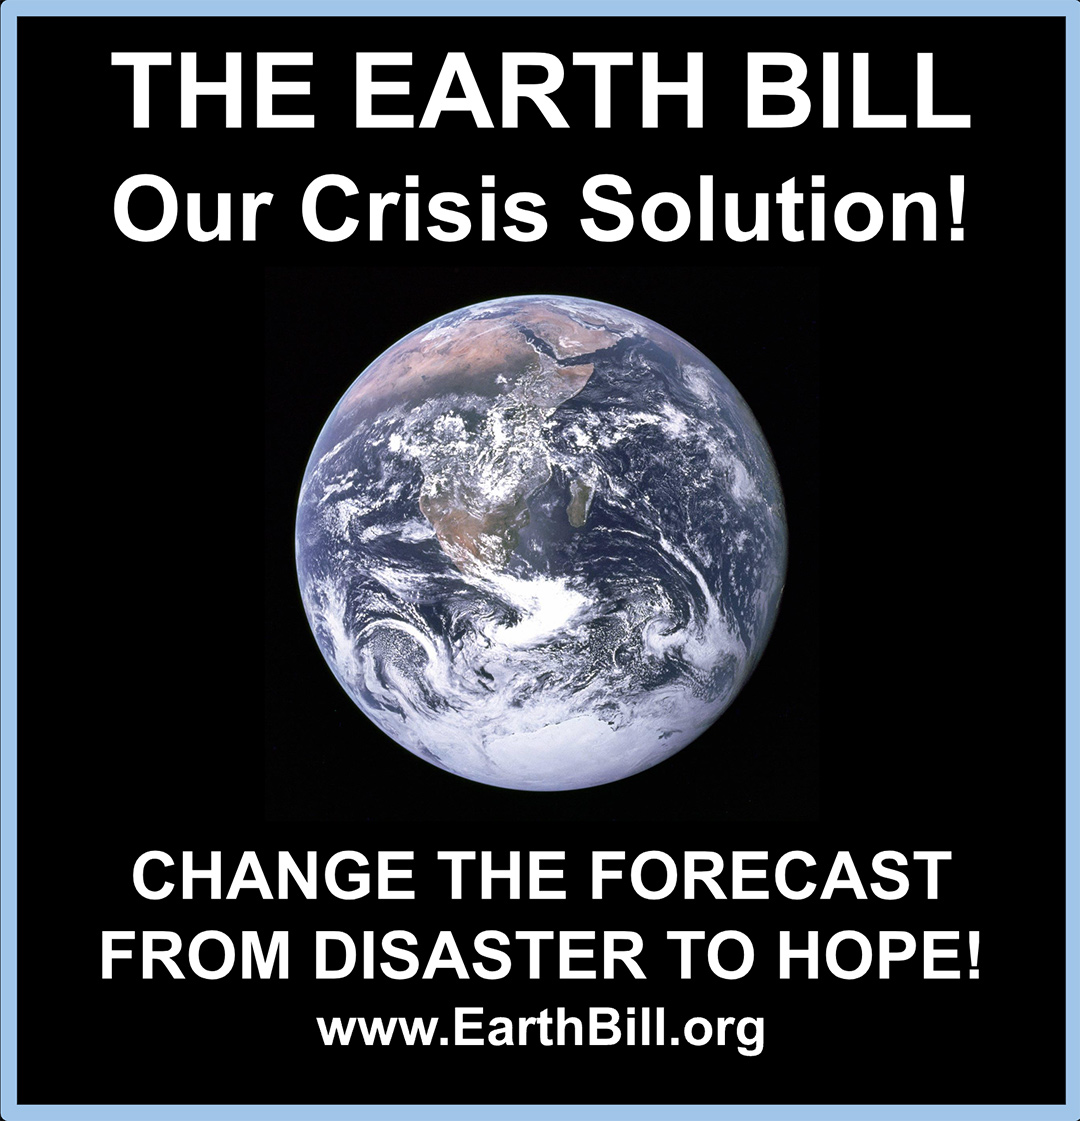 The Earth Bill. Our crisis solution! Change the forcast from disaster to hope! www.earthbill.org